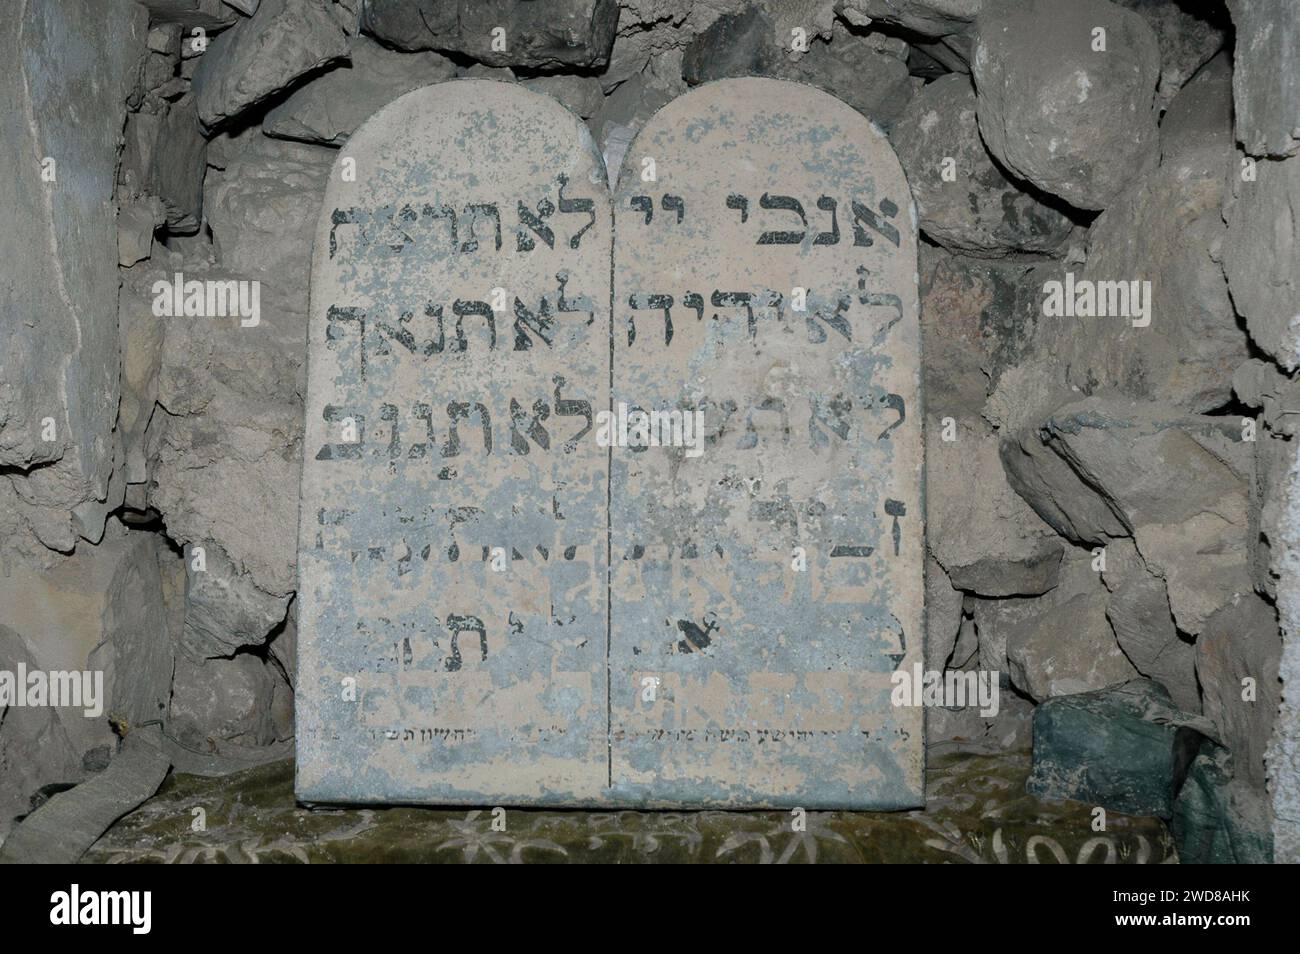 Stone tablet replica of the 10 commandments written in Hebrew and mounted above the tomb of King David on Mount Zion in Jerusalem. Partially obscured Stock Photo